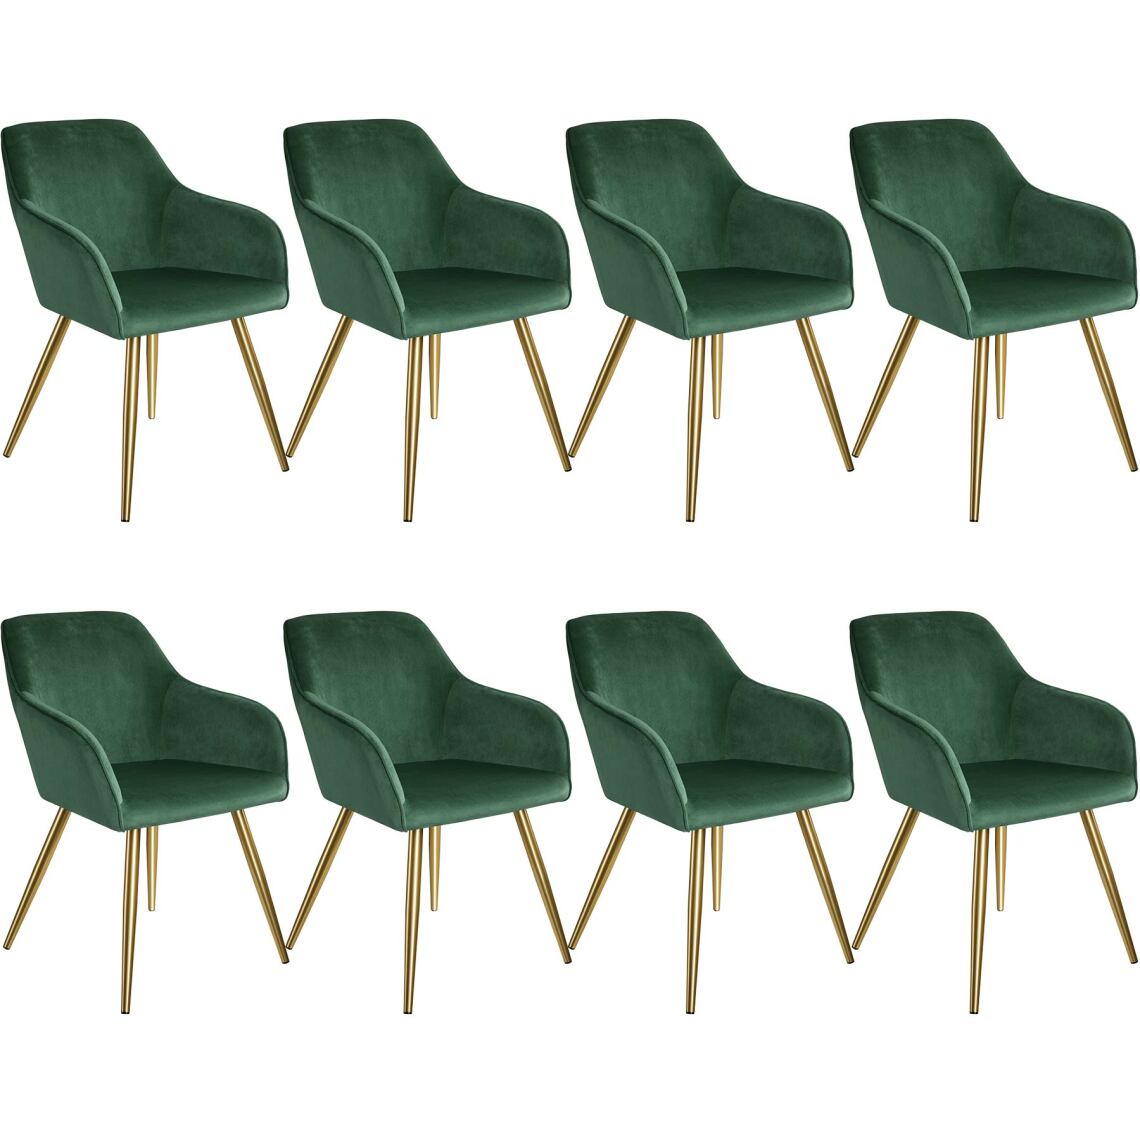 Tectake - 8 Chaises MARILYN Effet Velours Style Scandinave - vert foncé/or - Chaises